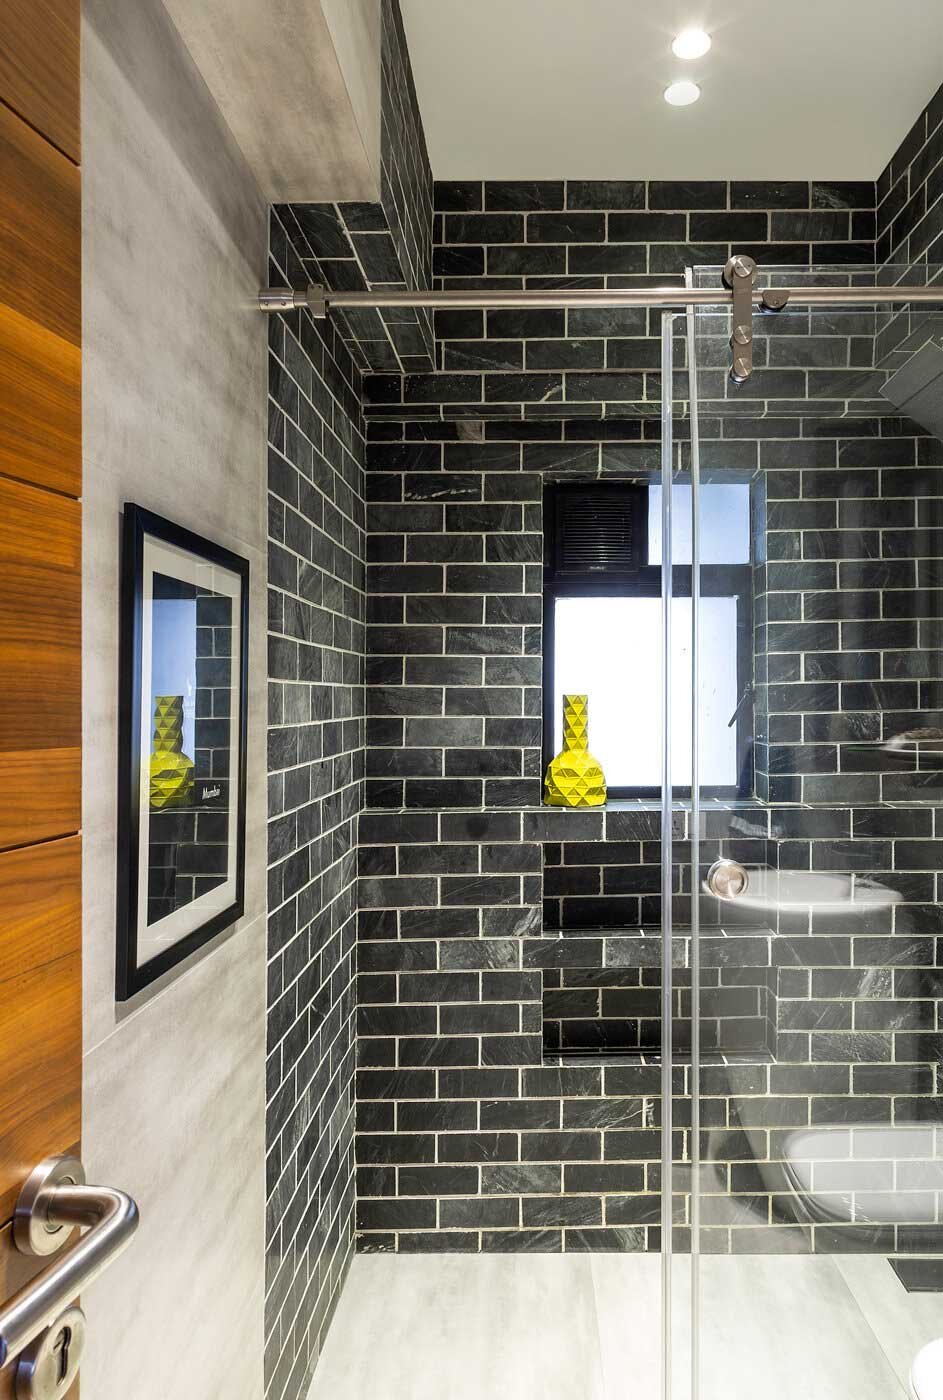 7 Simple Tips To Keep Tiles Clean And, How To Keep Black Bathroom Tiles Clean